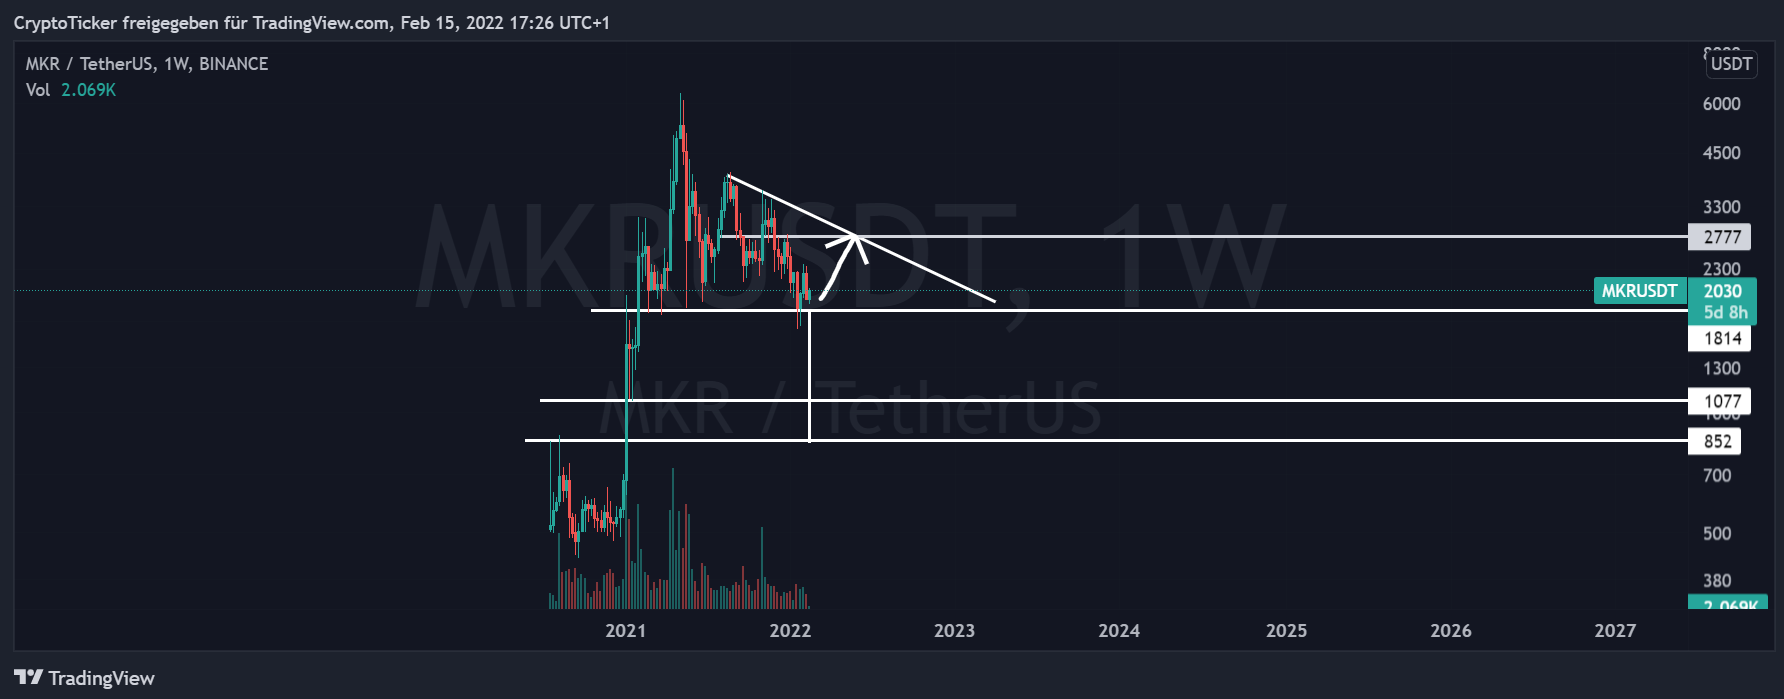 MKR/USDT 1-week chart showing the low potential prices of MKR